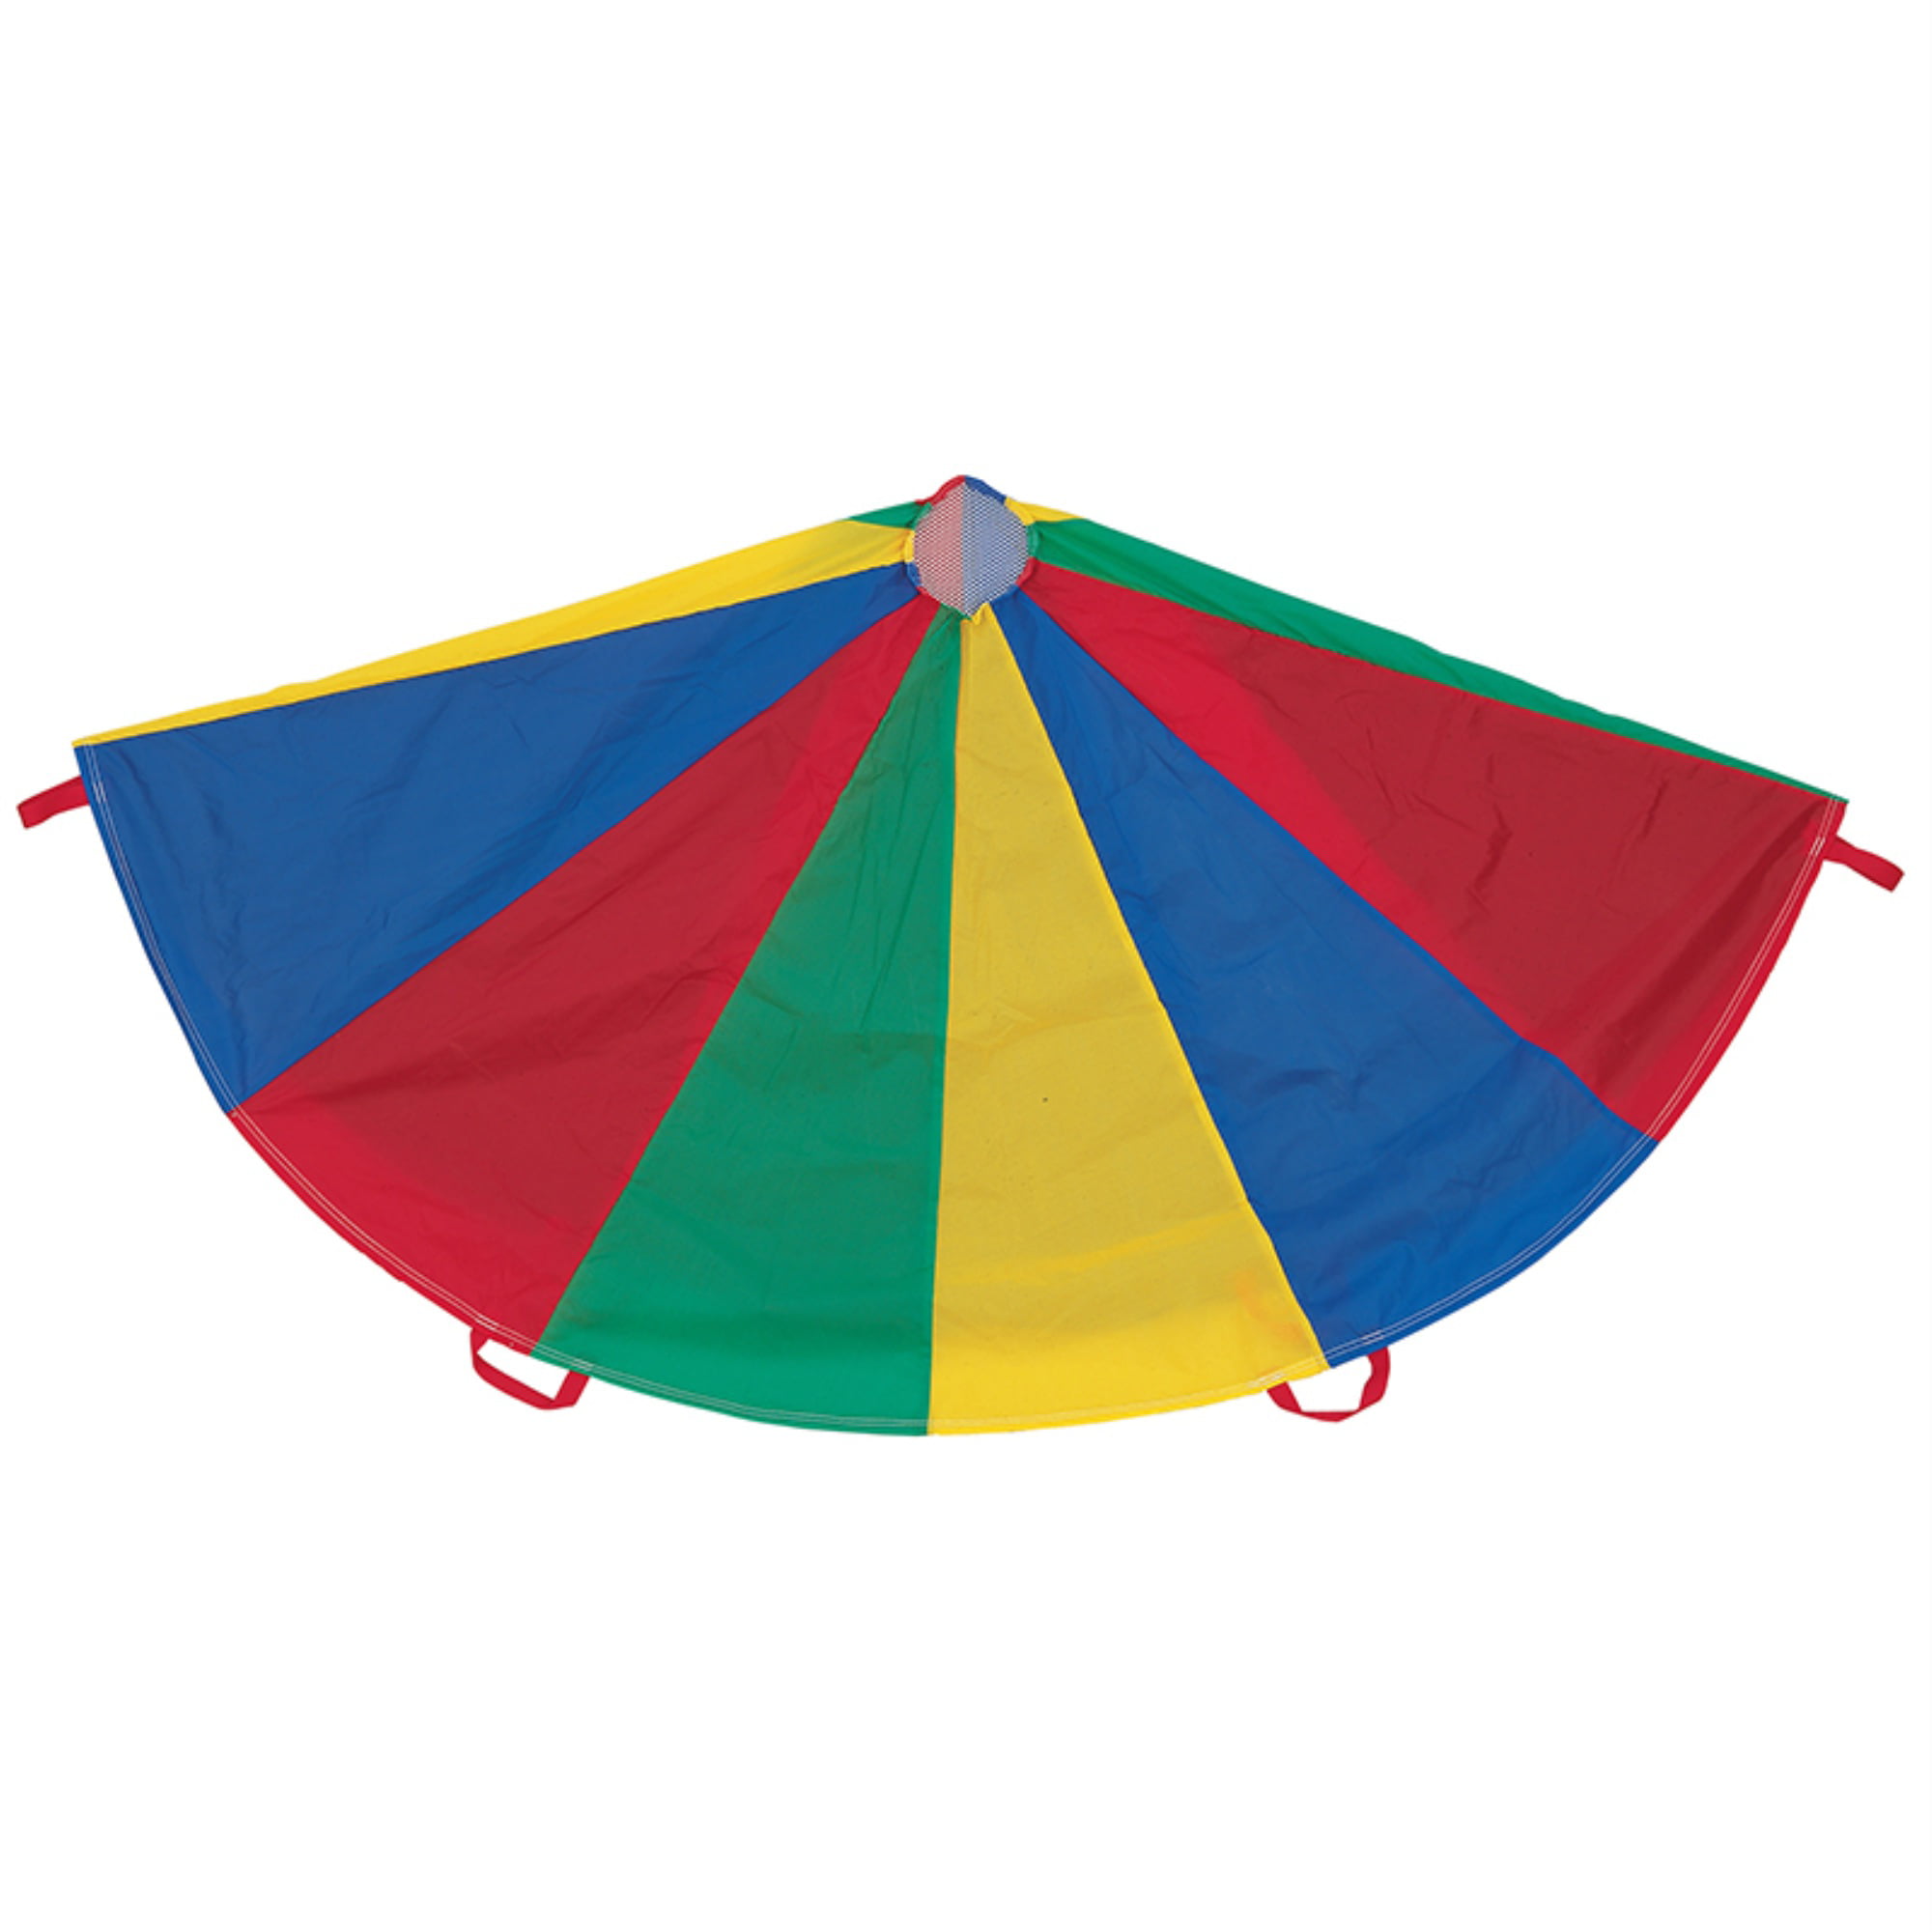 Kids Parachute with Handles 20' Foot Diameter for Movement Activities Colorful 